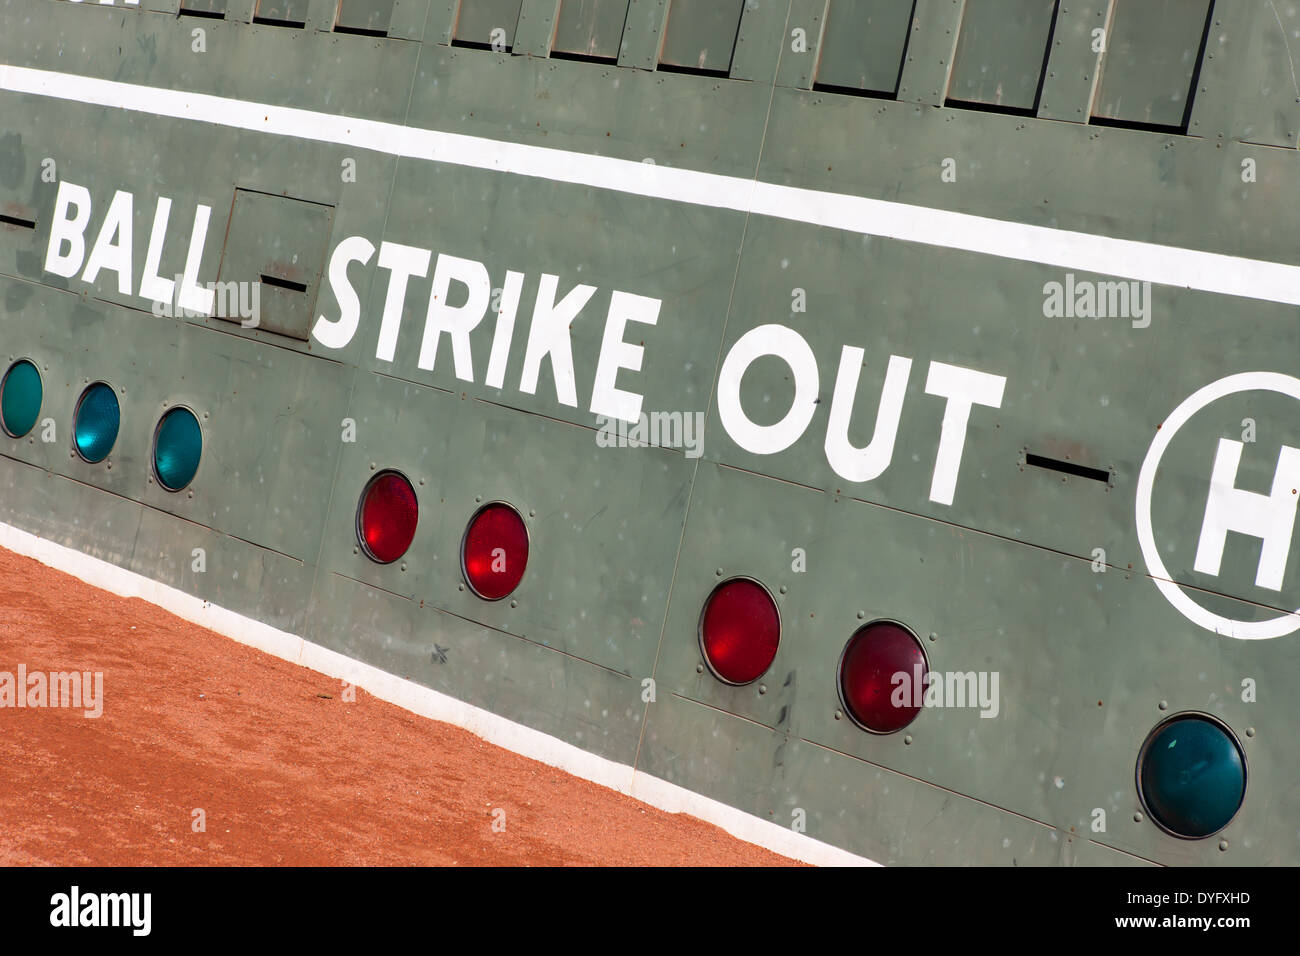 Scoreboard showing balls, strikes, and outs on the Green Monster in Fenway Park in Boston, Massachusetts. Stock Photo